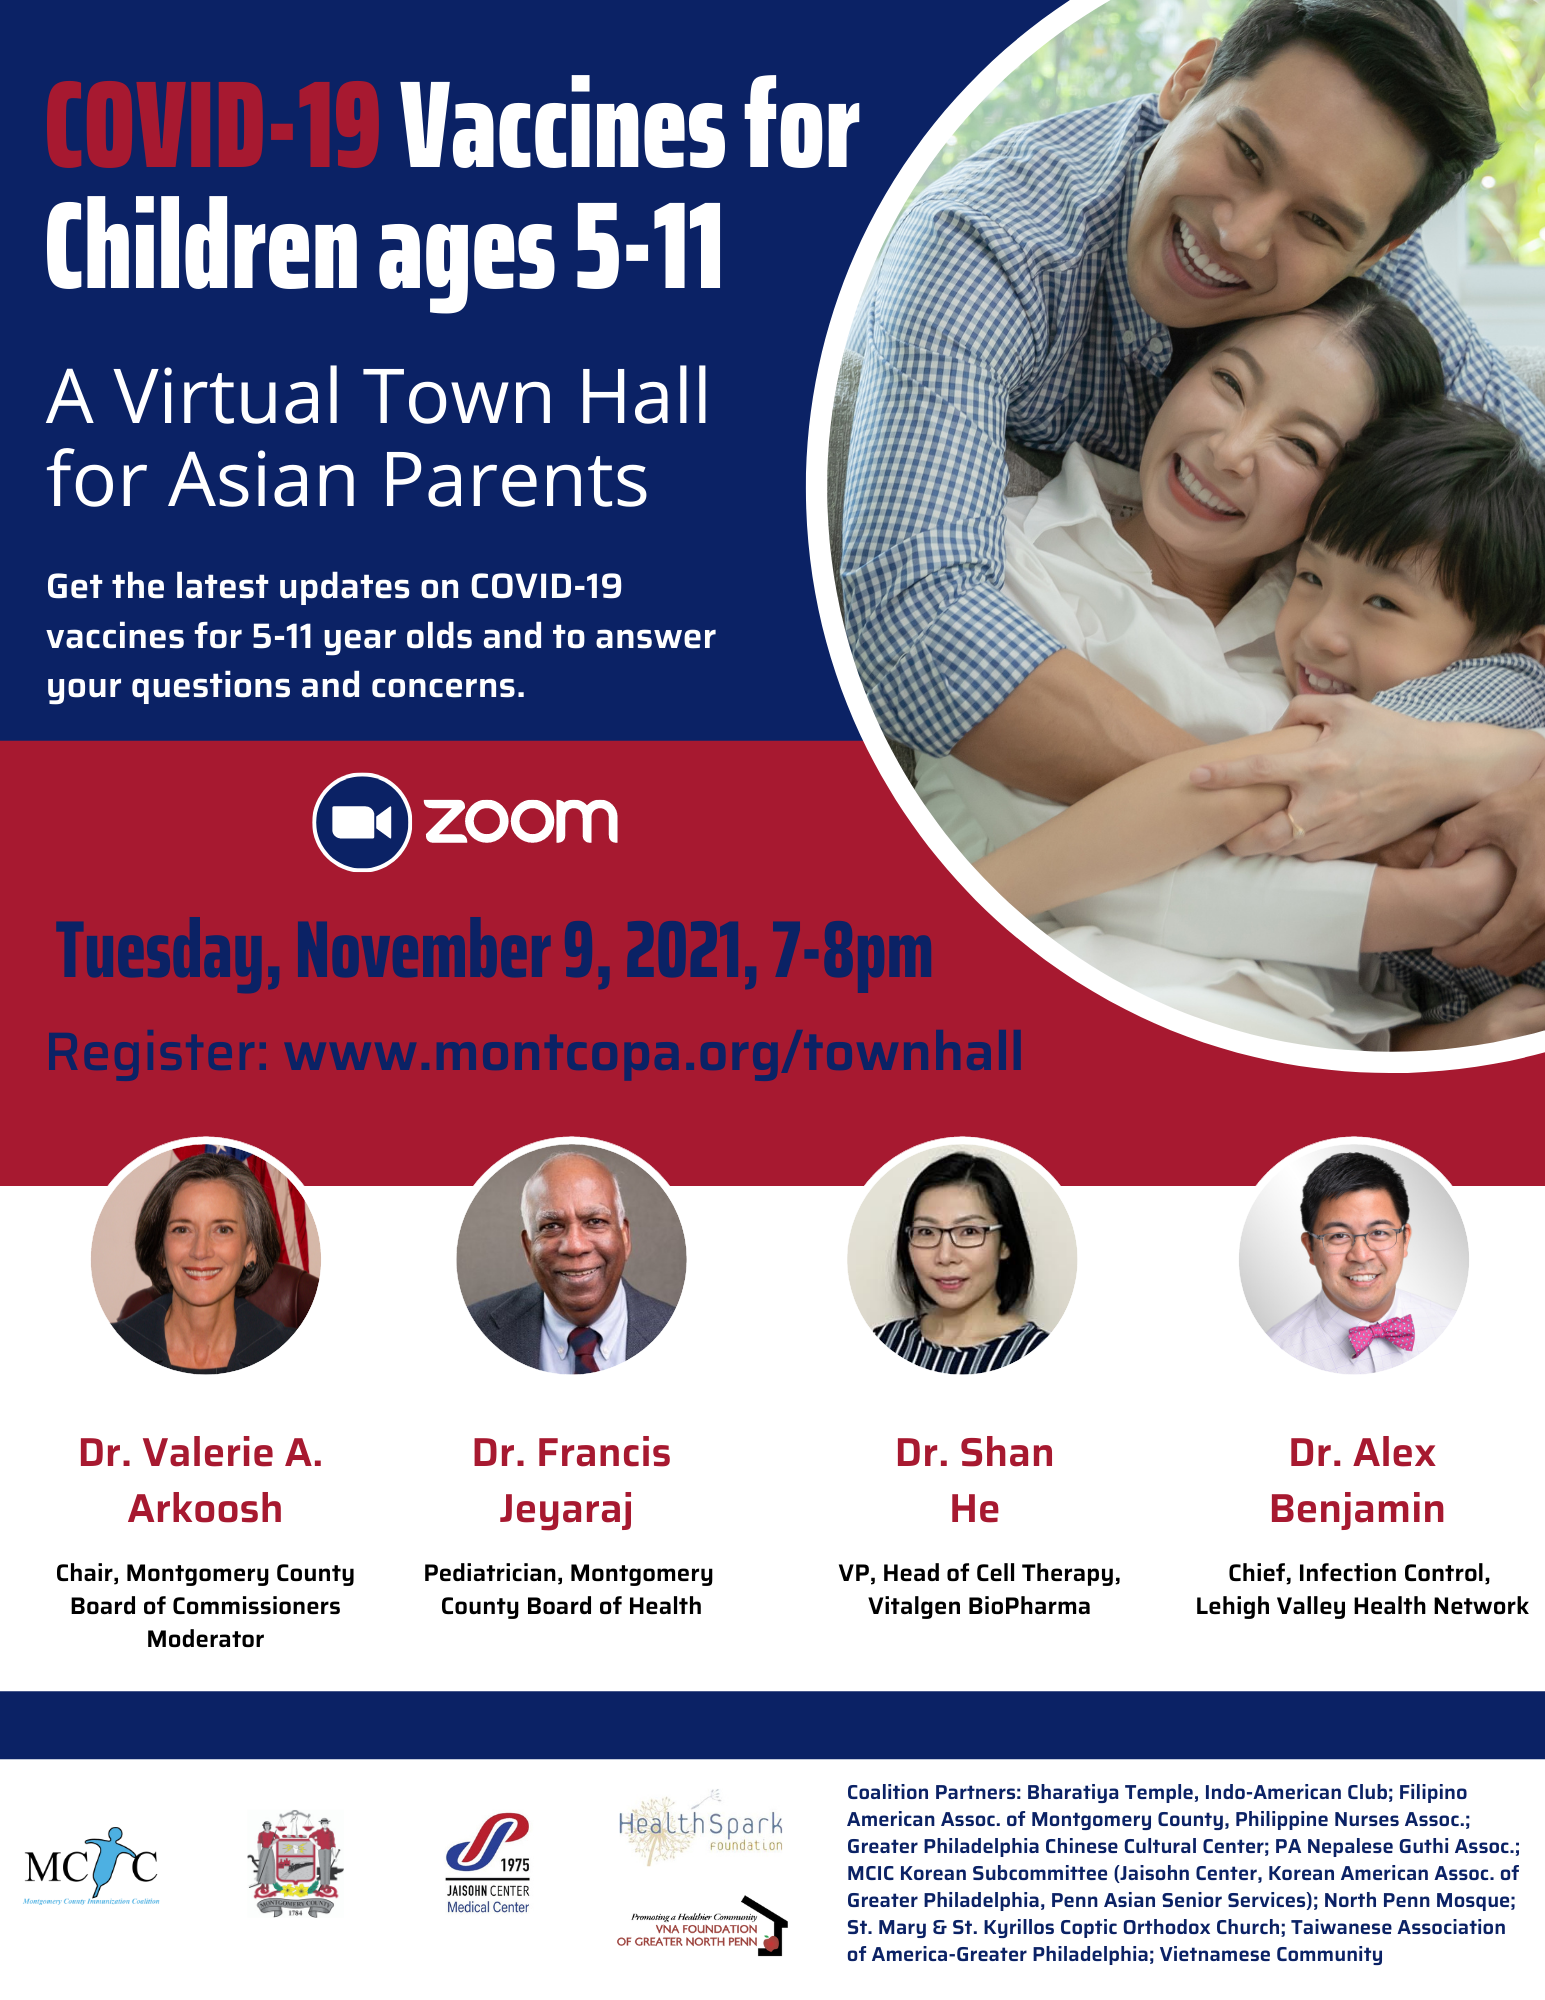 COVID-19 Vaccines for Children Town Hall for Asian Parents flyer